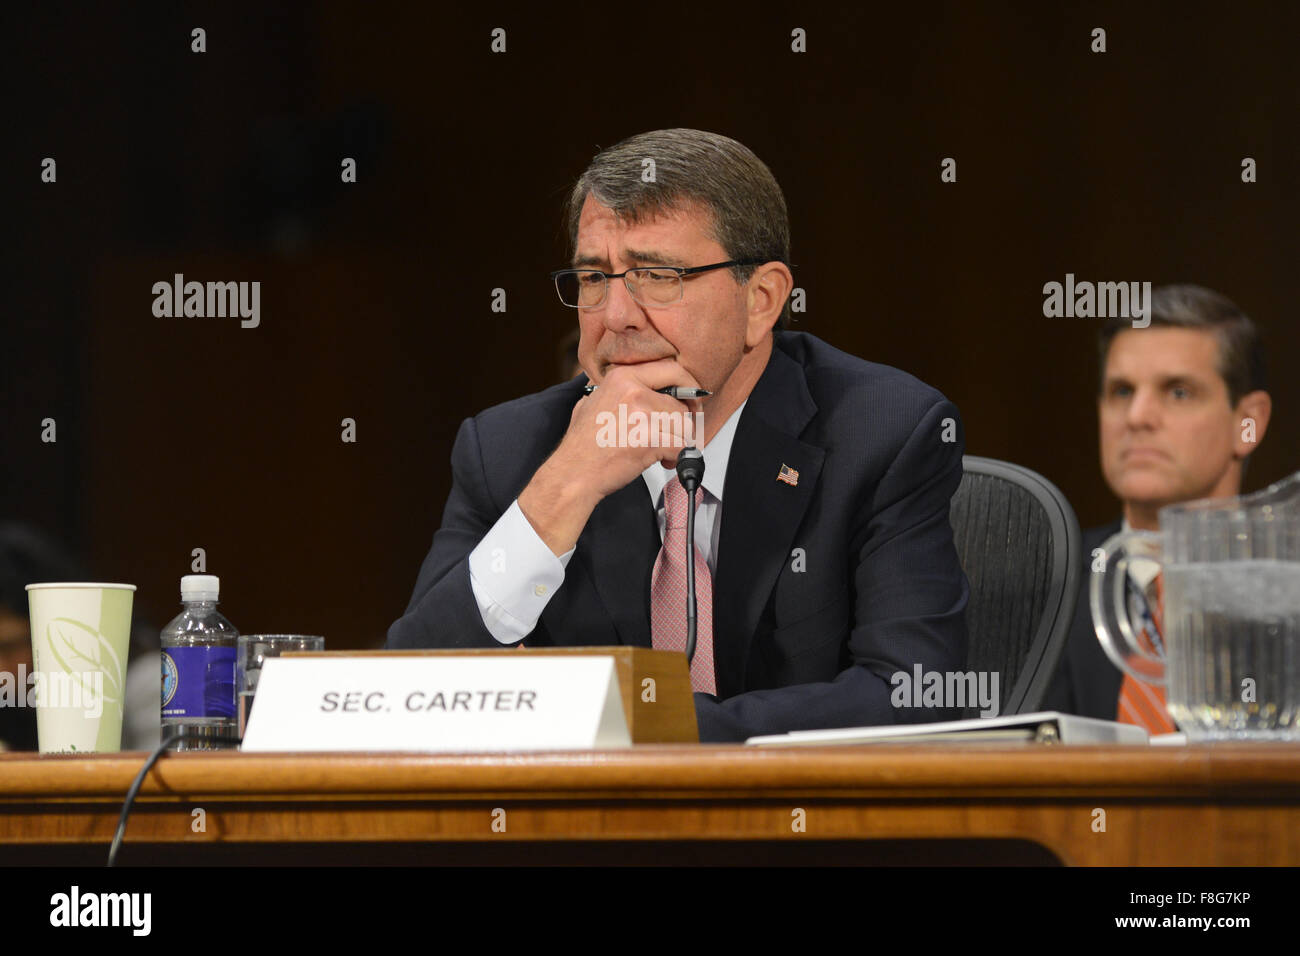 (151209)-- WASHINGTON D.C., Dec. 9, 2015 (Xinhua) -- U.S. Defense Secretary Ash Carter testifies before the Sneate Armed Services Committee on the U.S. strategy to counter the Islamic State of Iraq and the Levant and the U.S. policy toward Iraq and Syria, in Washington, DC, the United States, Dec. 9, 2015. U.S. Defense Secretary Ash Carter said on Wednesday the Pentagon was prepared to assist the Iraqi government with more personnel and attack helicopters to retake the key Iraqi city of Ramadi from the Islamic State (IS). (Xinhua/Zheng Qihang) Stock Photo